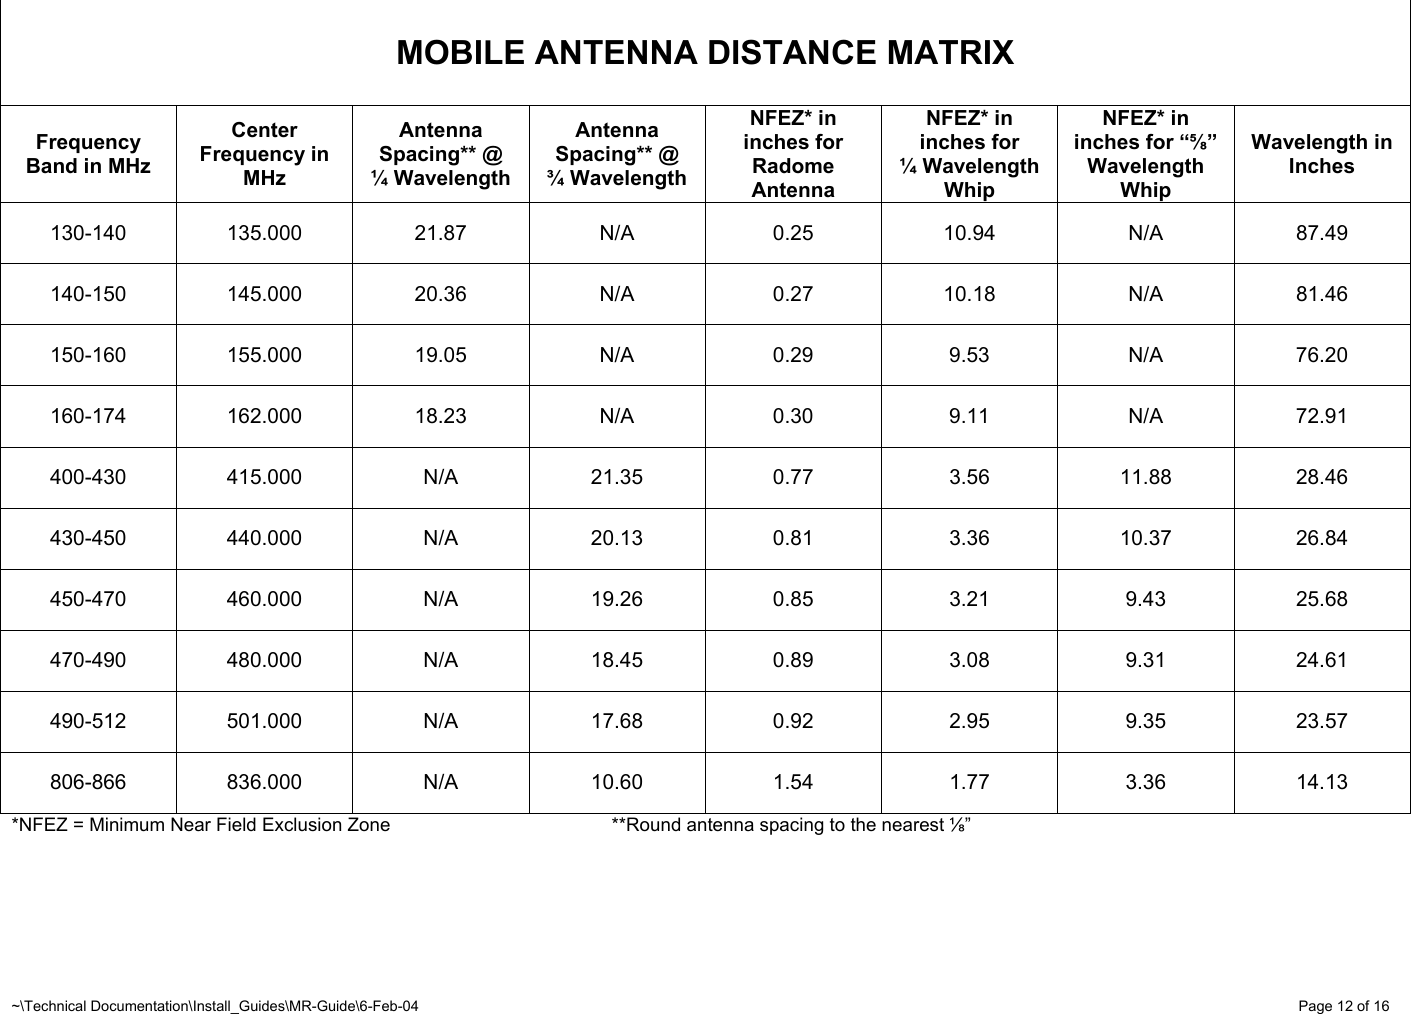 ~\Technical Documentation\Install_Guides\MR-Guide\6-Feb-04   Page 12 of 16    MOBILE ANTENNA DISTANCE MATRIX Frequency Band in MHz Center Frequency in MHz Antenna Spacing** @ ¼ Wavelength Antenna Spacing** @ ¾ Wavelength NFEZ* in inches for Radome Antenna NFEZ* in inches for  ¼ Wavelength Whip NFEZ* in inches for “⅝” Wavelength Whip Wavelength in Inches 130-140 135.000  21.87  N/A  0.25 10.94  N/A  87.49 140-150 145.000  20.36  N/A  0.27 10.18  N/A  81.46 150-160 155.000  19.05  N/A  0.29  9.53  N/A  76.20 160-174 162.000  18.23  N/A  0.30  9.11  N/A  72.91 400-430 415.000  N/A  21.35  0.77 3.56 11.88 28.46 430-450 440.000  N/A  20.13  0.81 3.36 10.37 26.84 450-470 460.000  N/A  19.26  0.85 3.21 9.43 25.68 470-490 480.000  N/A  18.45  0.89 3.08 9.31 24.61 490-512 501.000  N/A  17.68  0.92 2.95 9.35 23.57 806-866 836.000  N/A  10.60  1.54 1.77 3.36 14.13 *NFEZ = Minimum Near Field Exclusion Zone       **Round antenna spacing to the nearest ⅛” 